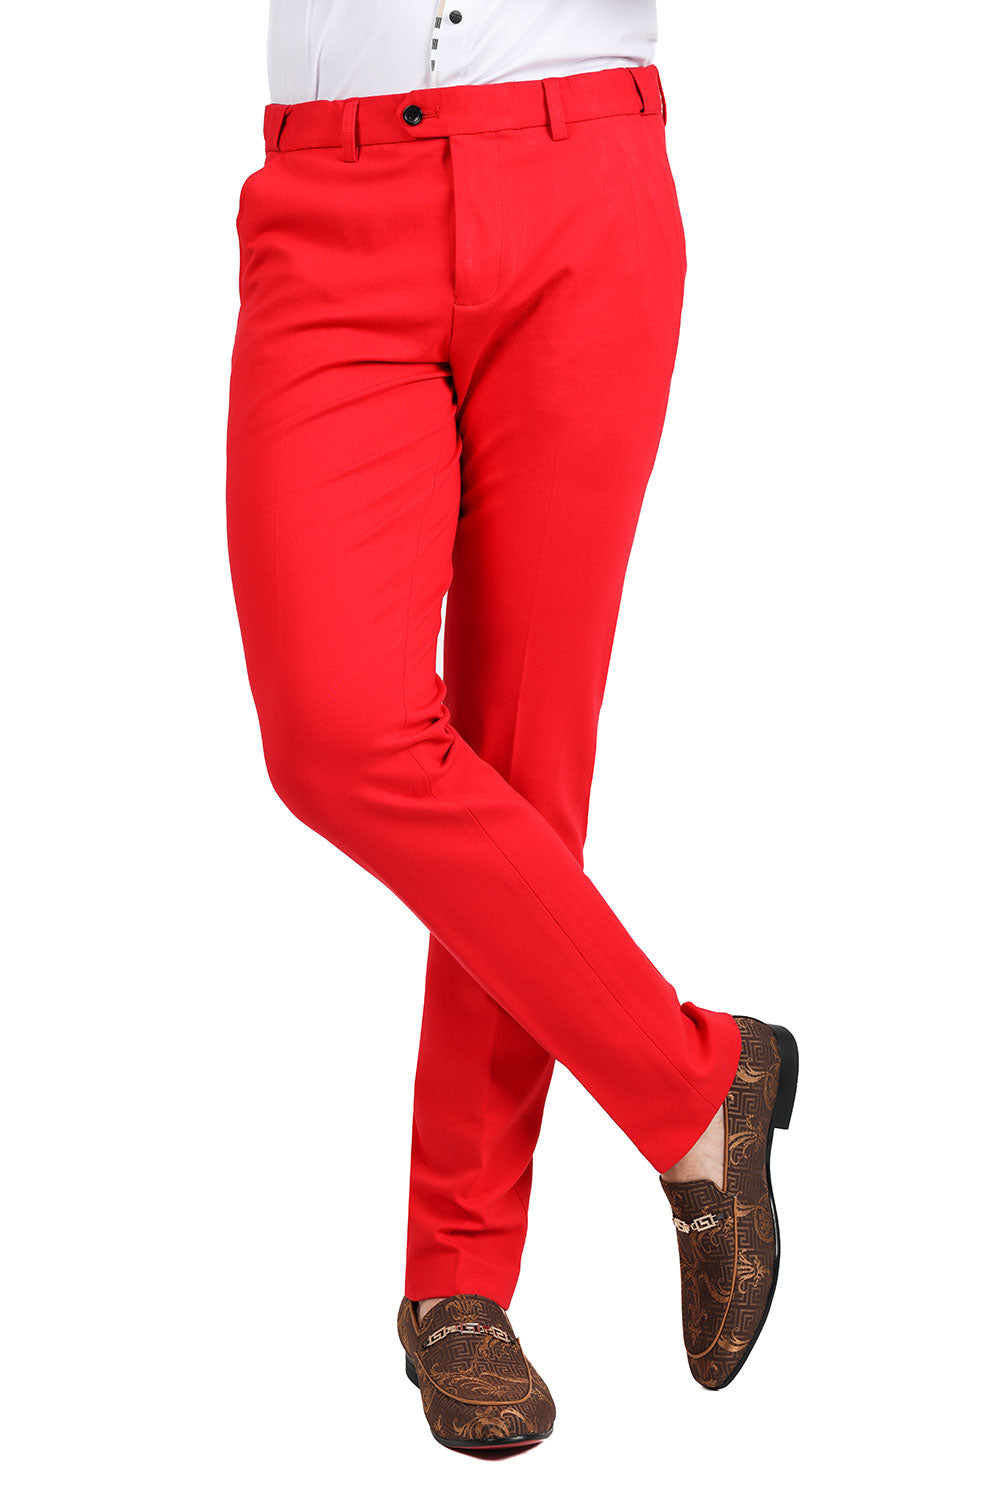 Barabas Men's Solid Color Basic Essential Chino Dress Pants 2CP196 Red